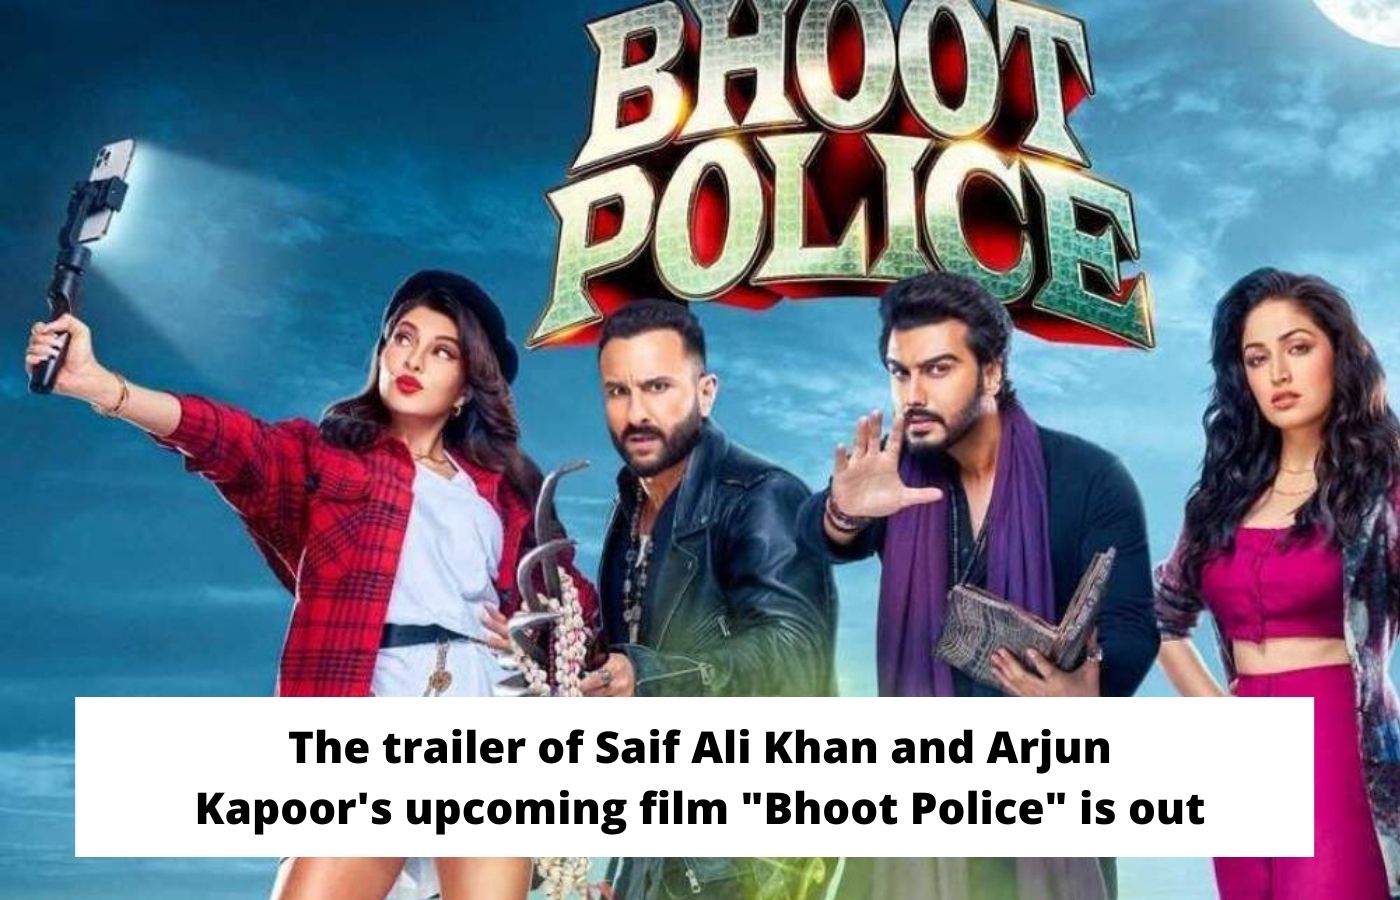 The trailer of Saif Ali Khan and Arjun Kapoor's upcoming film Bhoot Police is out